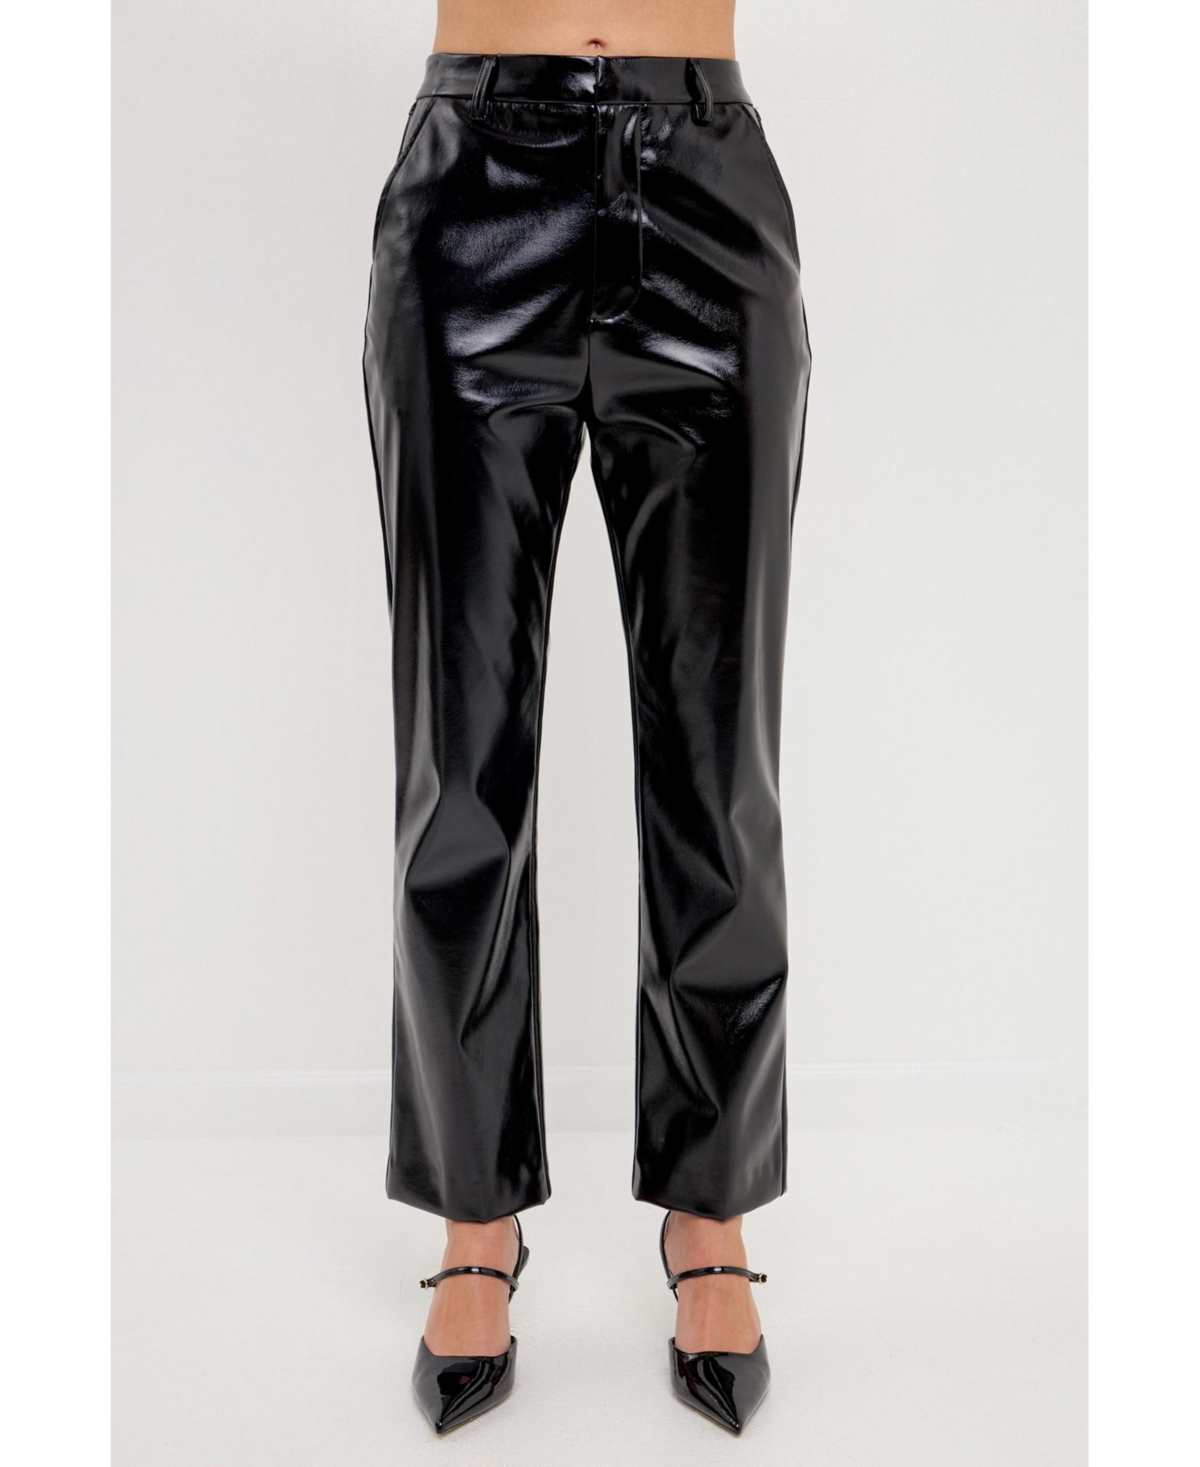 Straight Leather Pants Women High Waist Pu Faux Leather Trousers